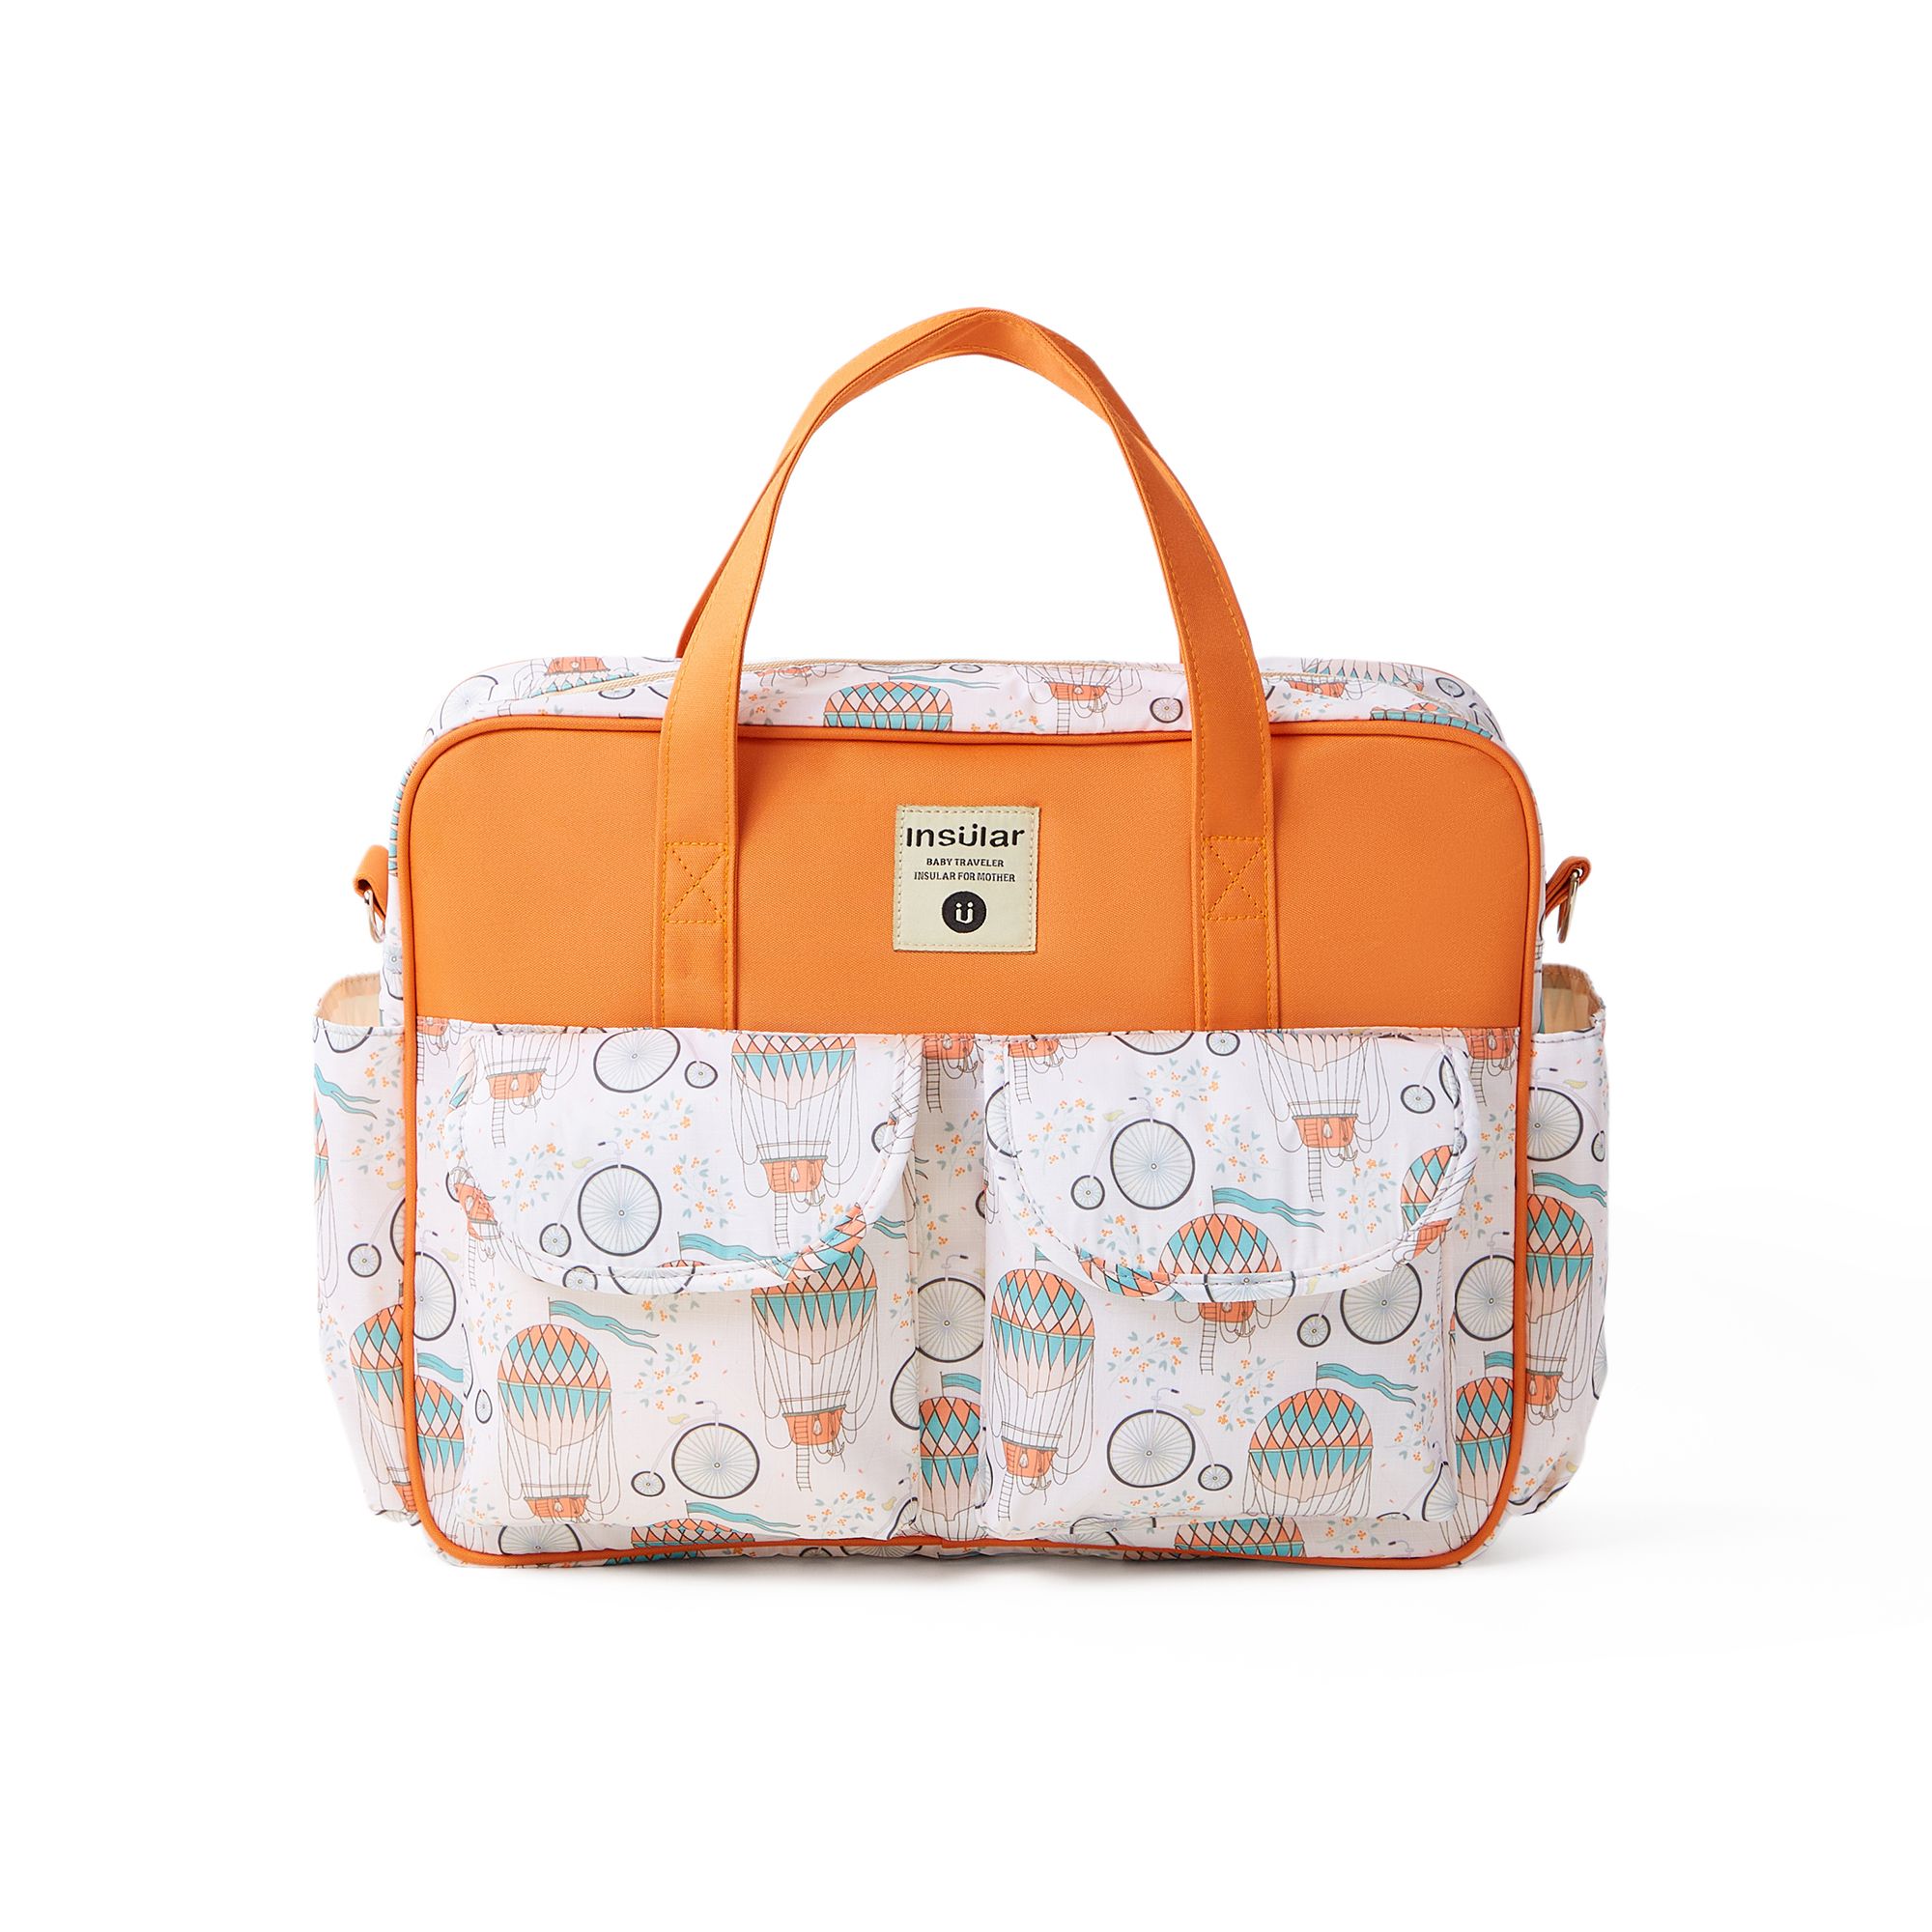 Fashion Maternity Multi-functional Waterproof Diaper Bag For Mom And Baby